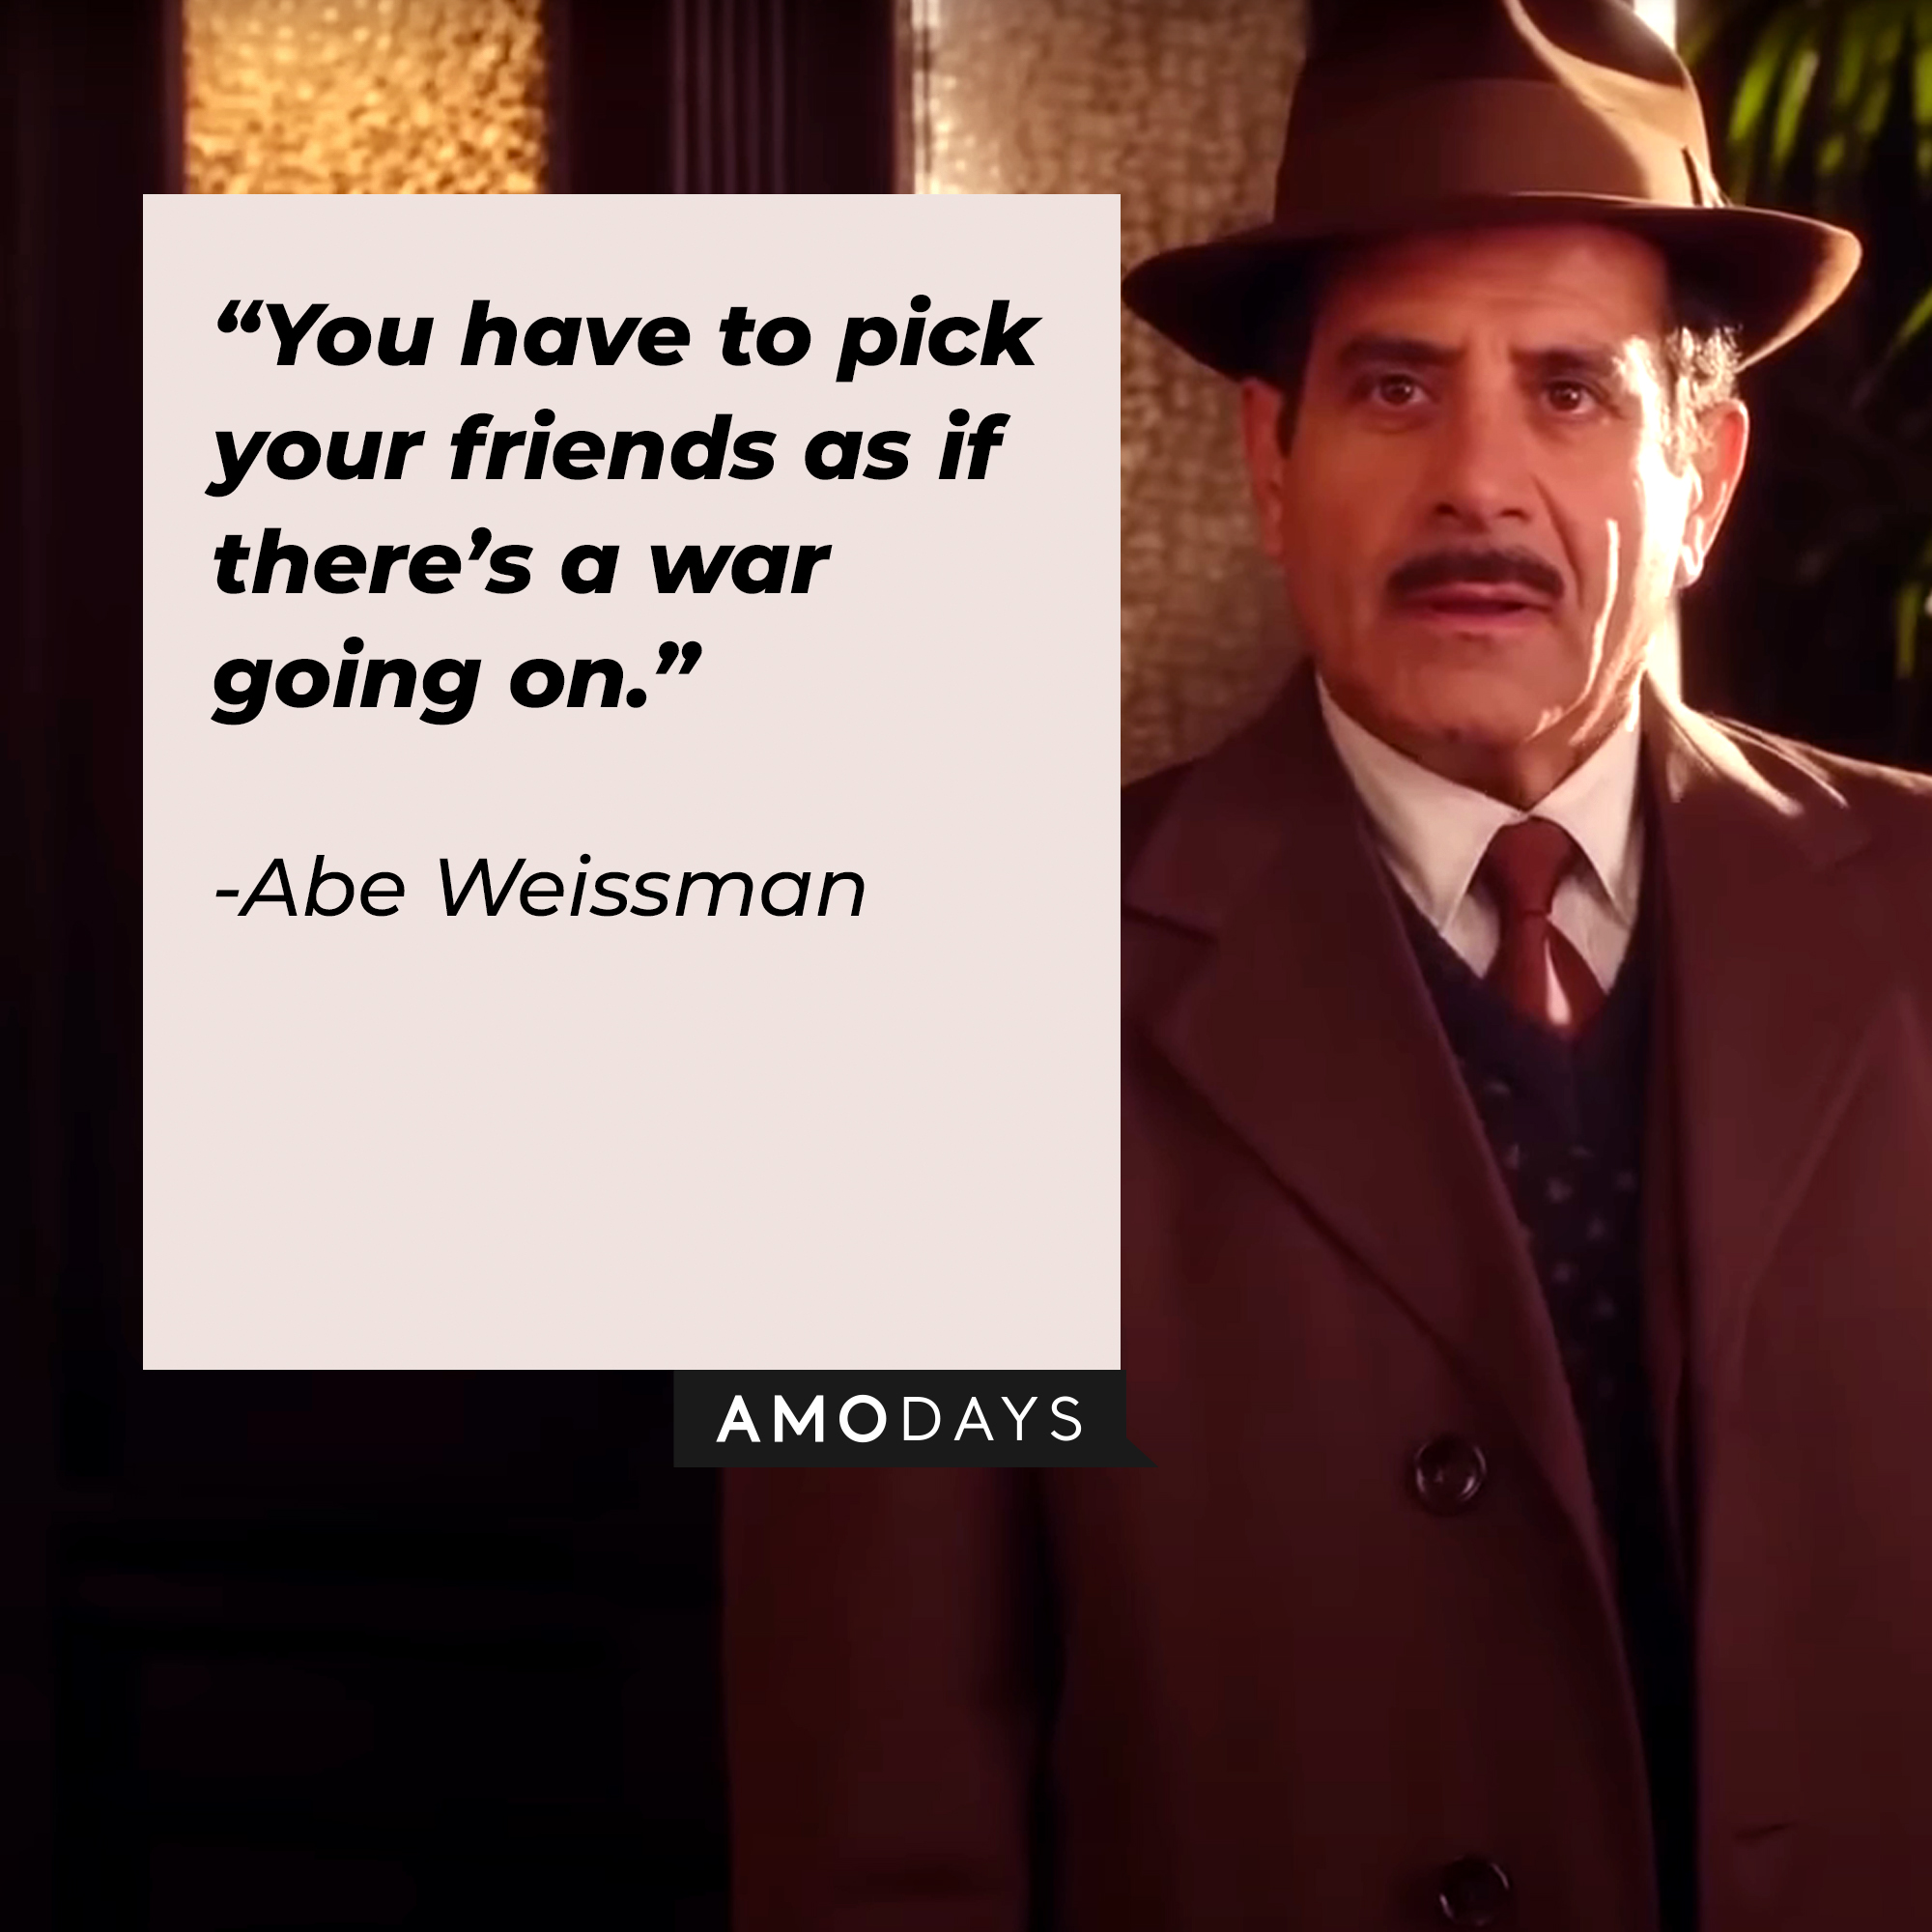 Abe Weissman, with his quote:“You have to pick your friends as if there’s a war going on.” | Source: youtube.com/PrimeVideoUK